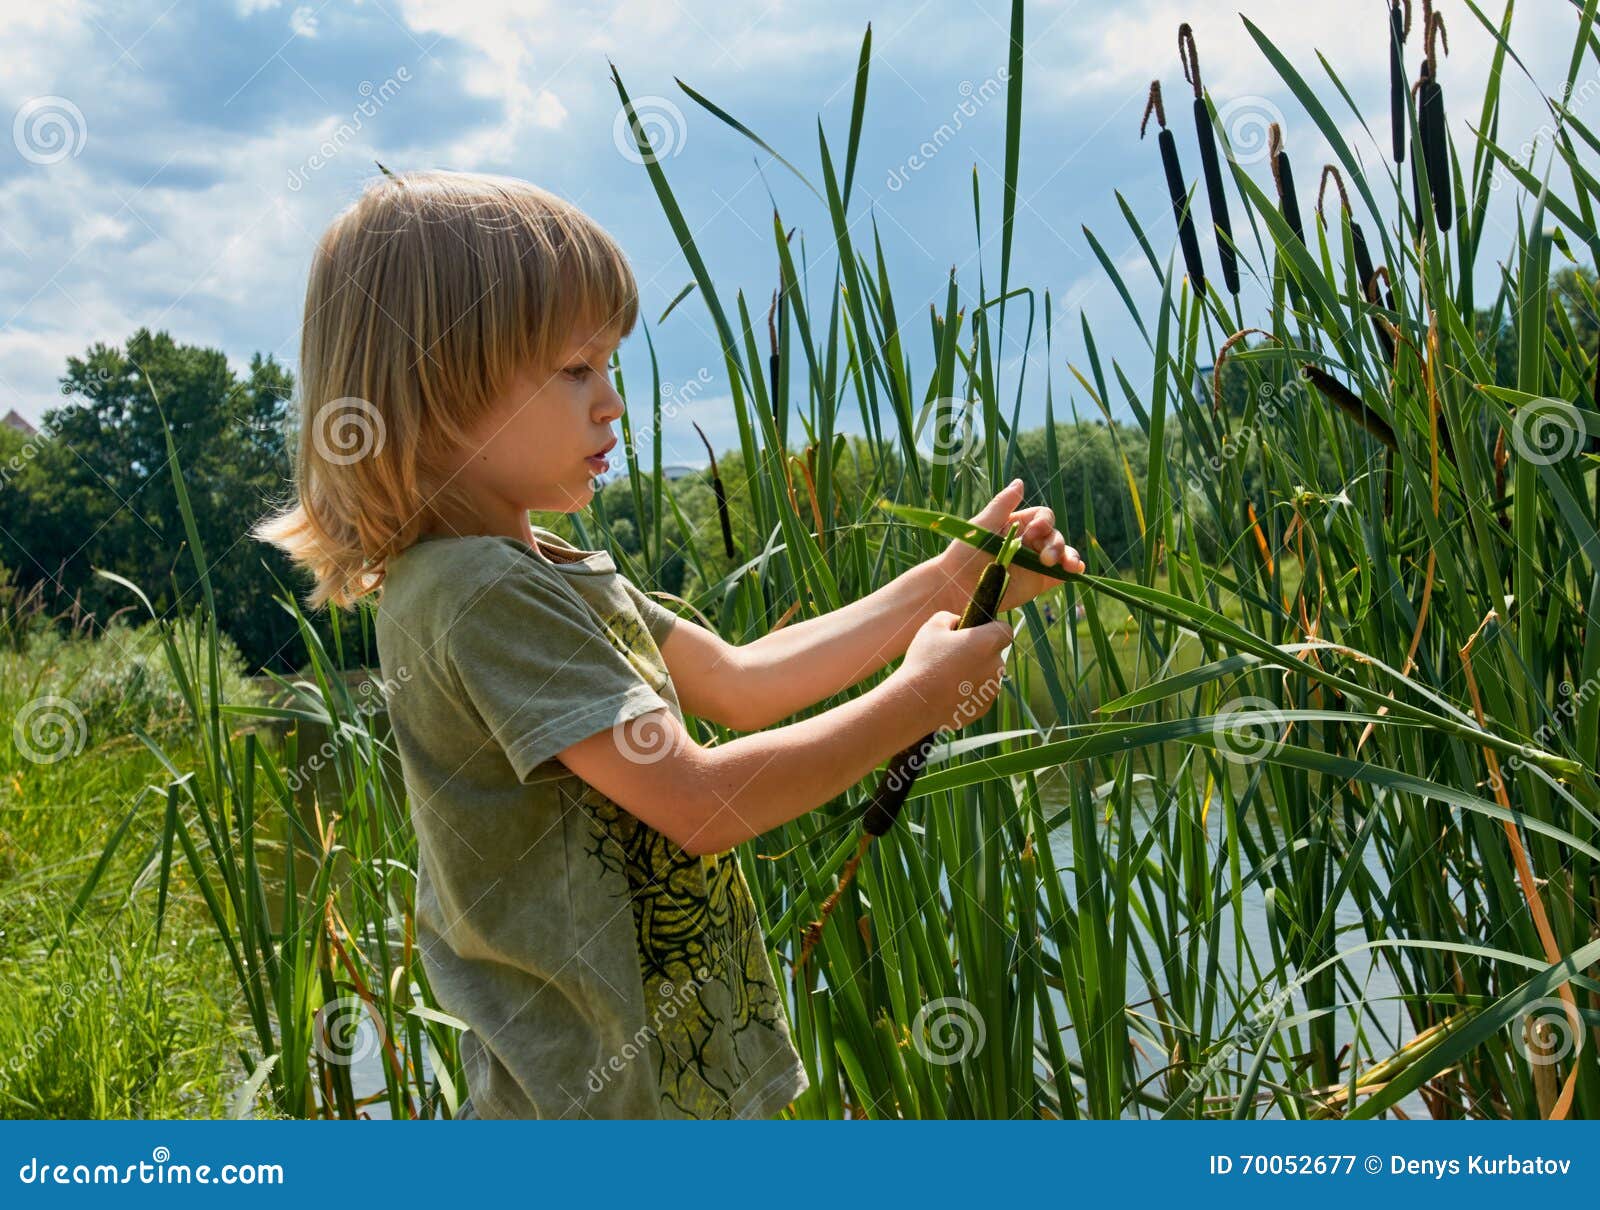 Kid in summer. Cute boy playing with bulrush outdoor. summer